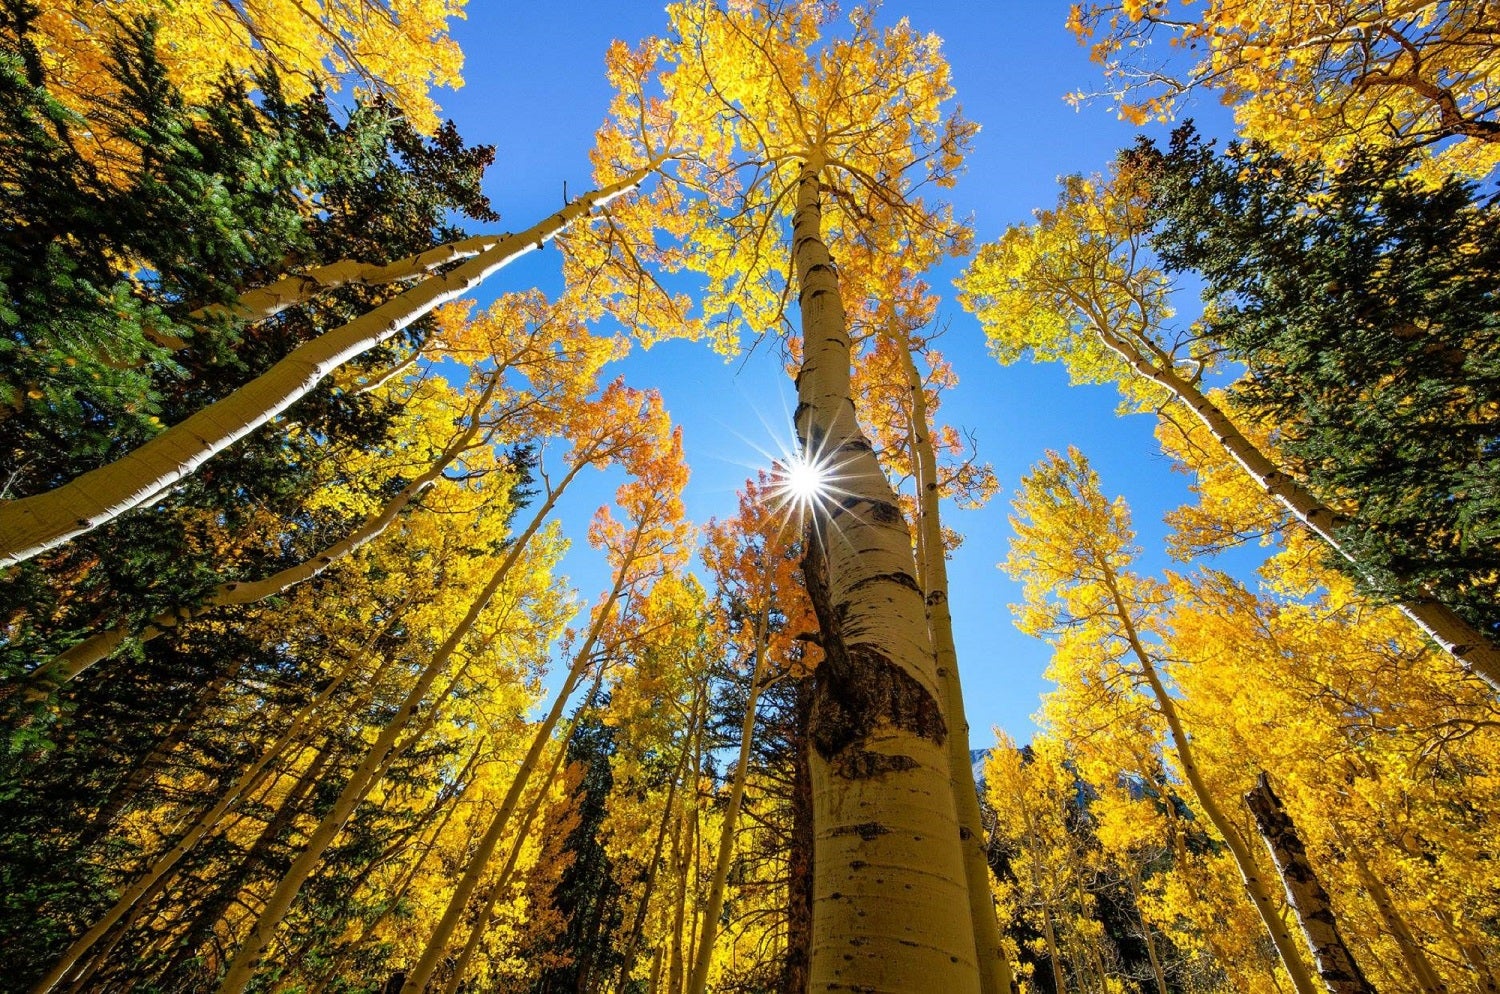 Yellow fall foliage on quaking aspens in Great Basin National Park